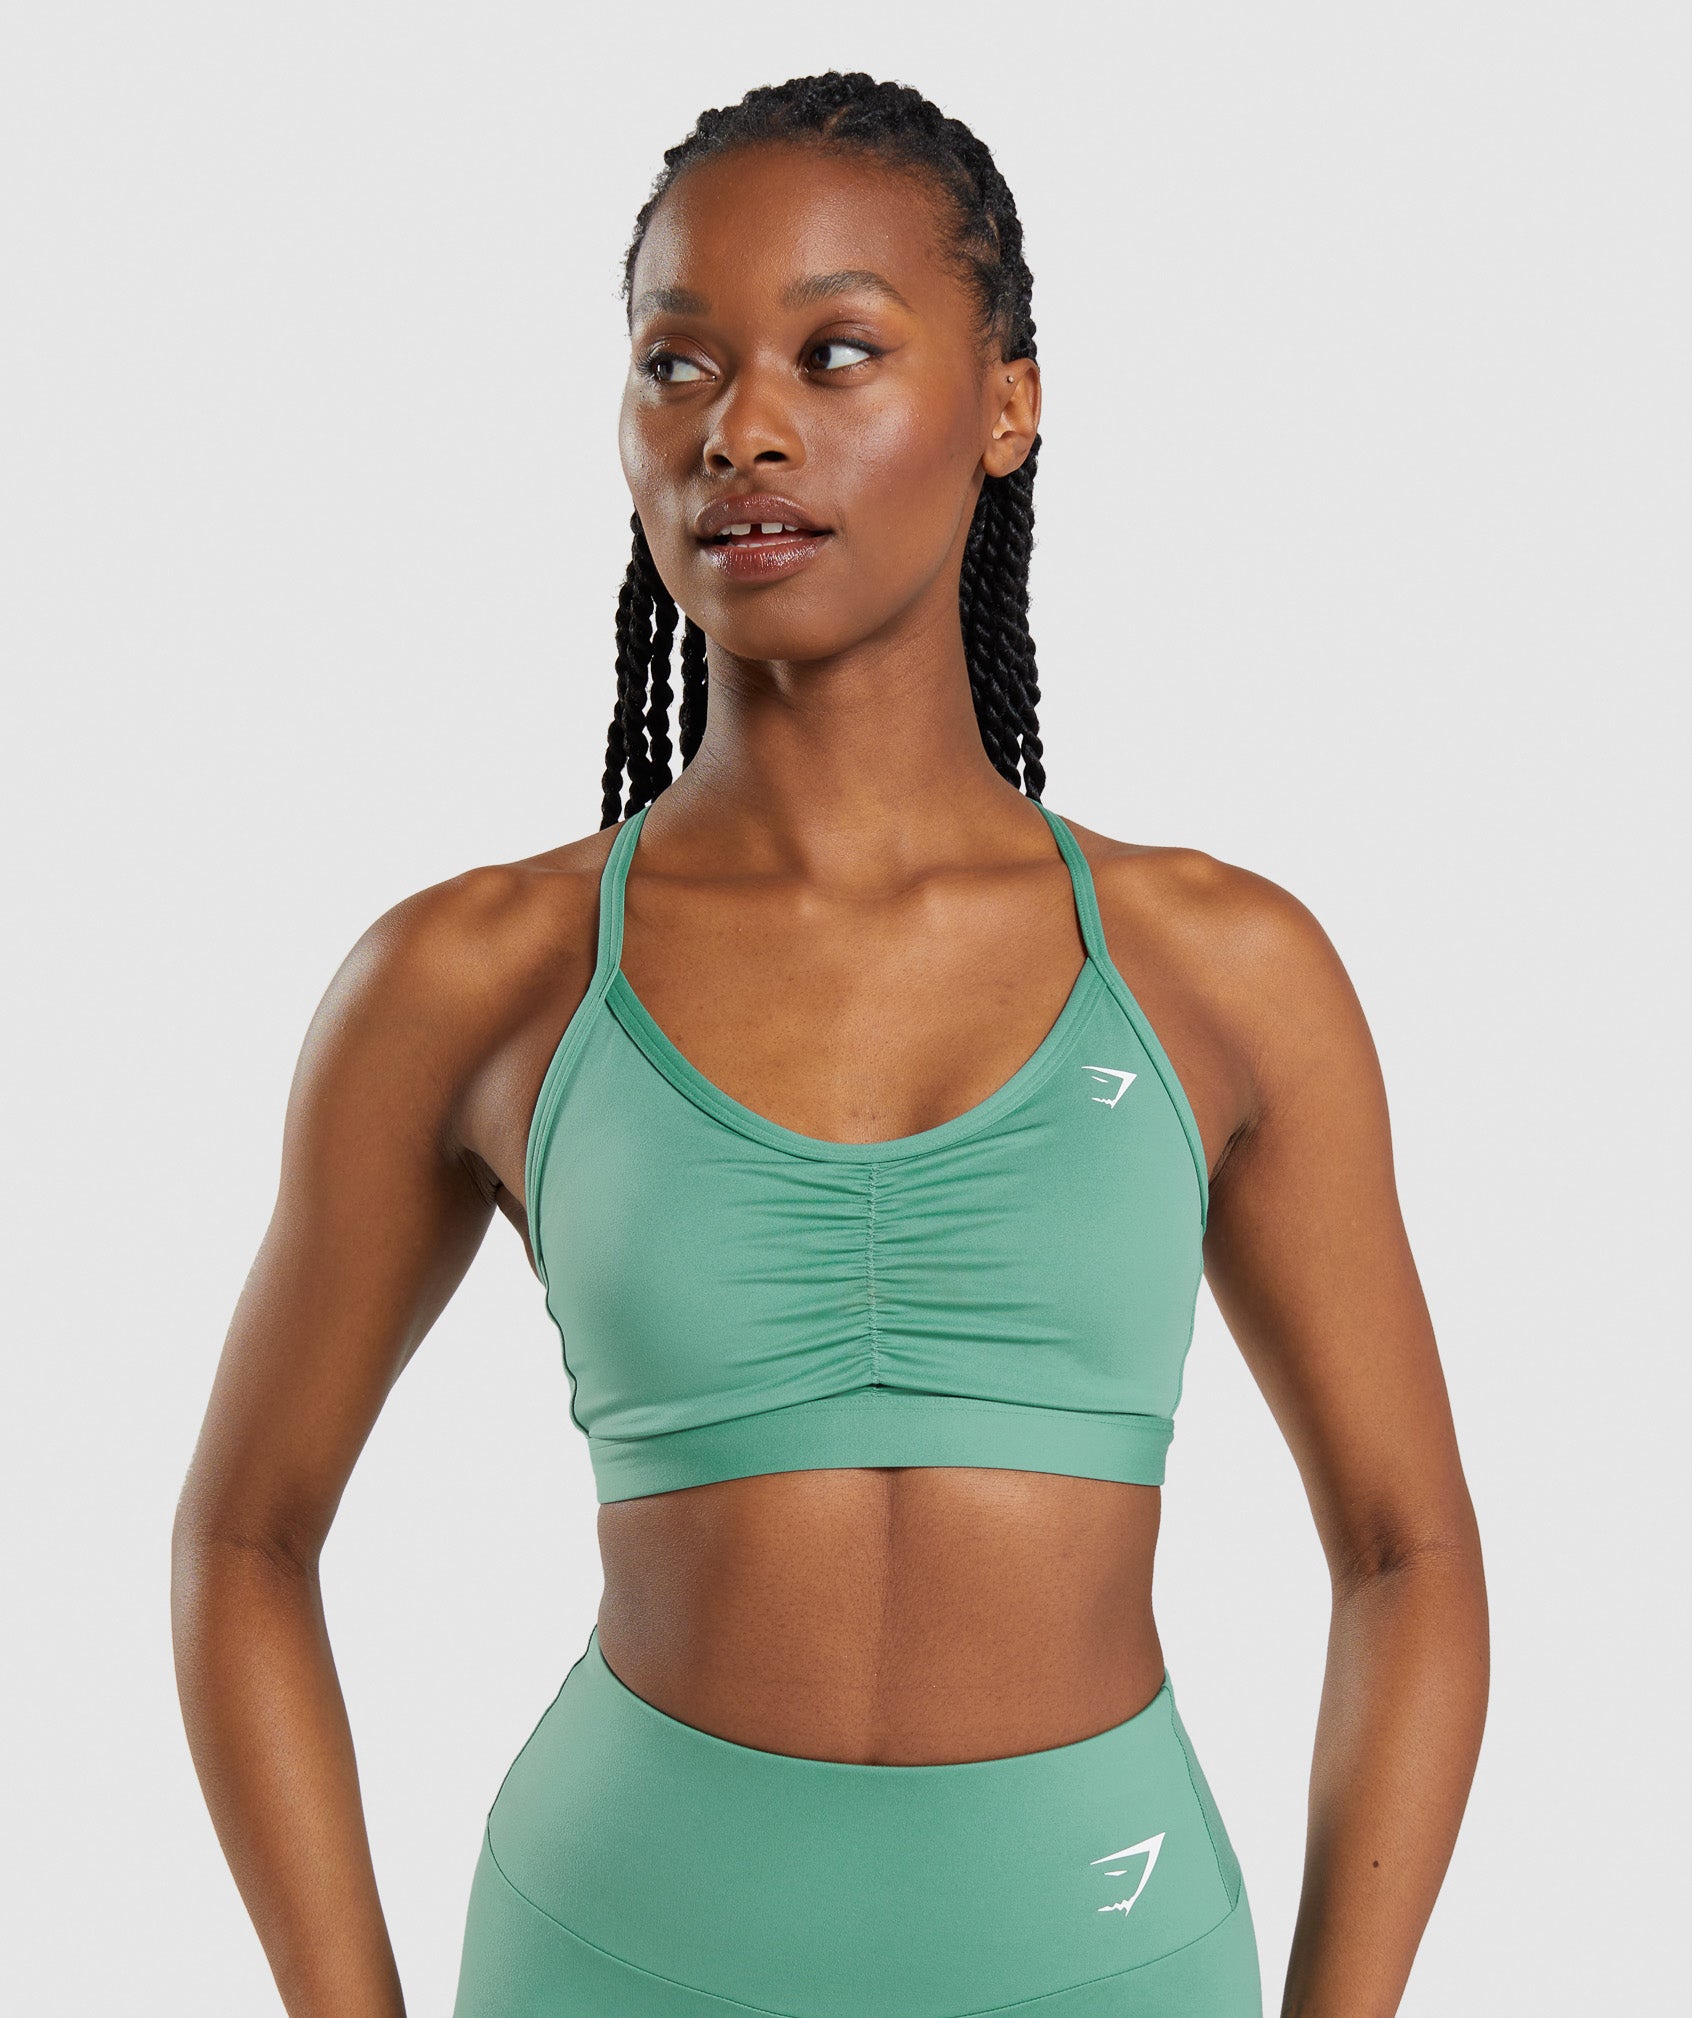 Gymshark Minimal Sports Bra Green - $38 New With Tags - From Amalia